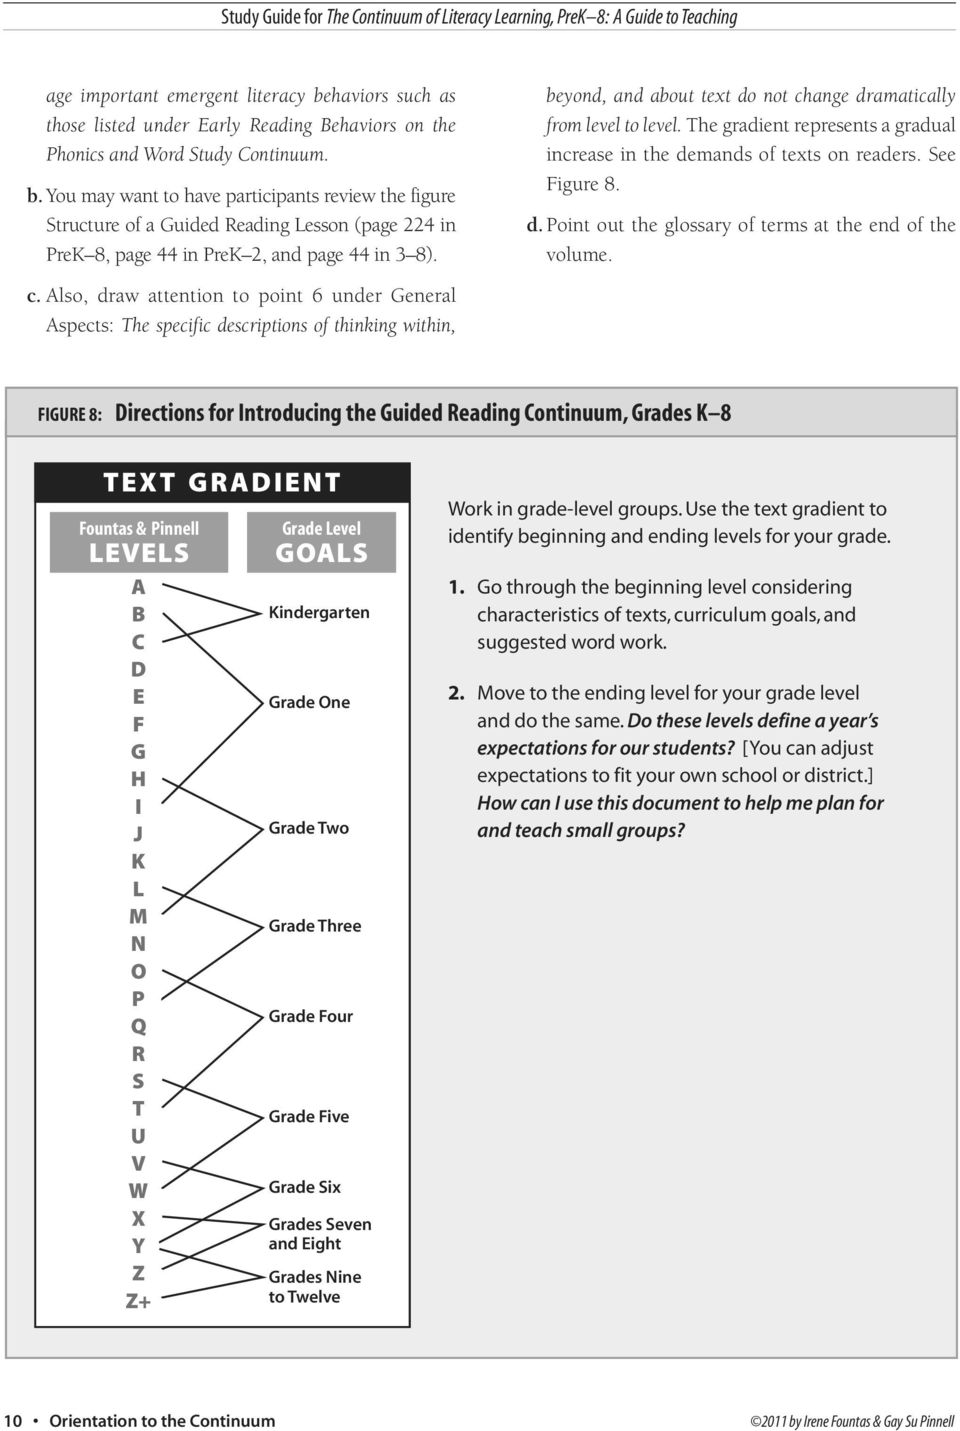 StudyGuide. Irene C. Fountas Gay Su Pinnell - PDF Free Download Inside Guided Reading Lesson Plan Template Fountas And Pinnell